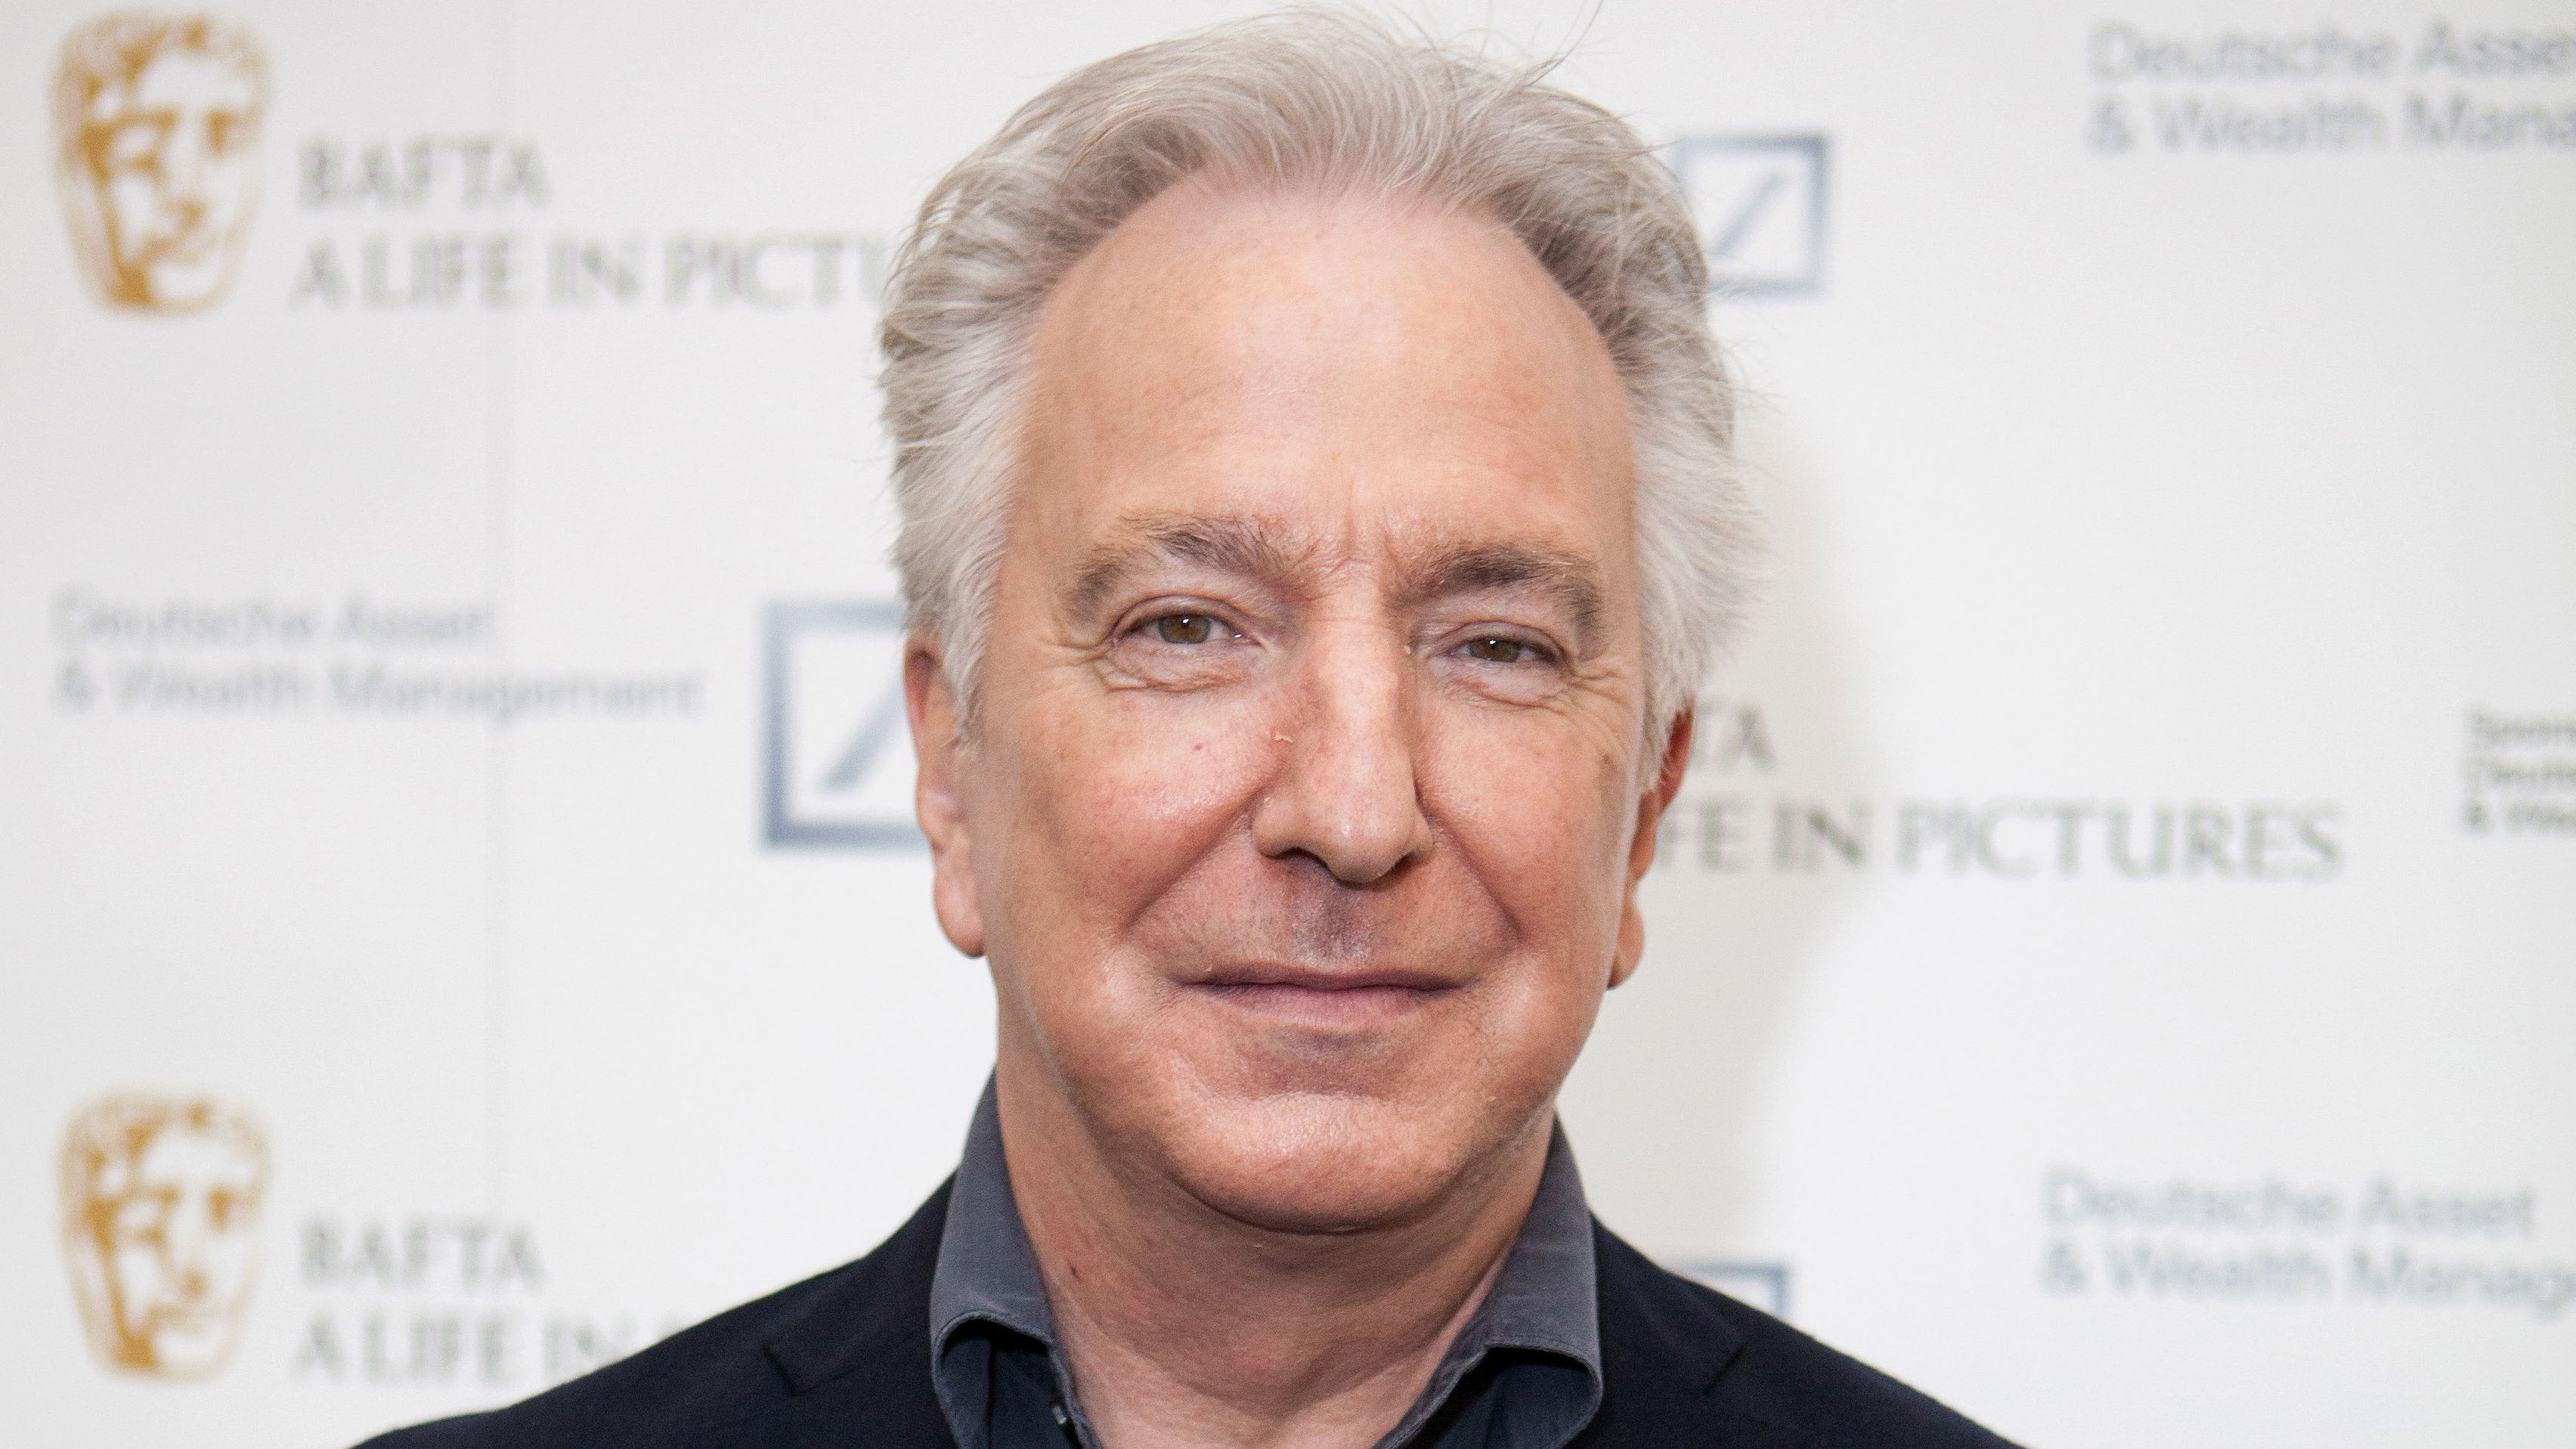 <p>Veteran British actor Alan Rickman, known for his memorable portrayal of screen villains, has died at the age of 69 after suffering from cancer.</p><p>Rickman, who won a Golden Globe and a BAFTA during his career as a film, television and theatre actor, had a rich, smooth voice and brooding delivery that helped make him a sex symbol.</p><p>Rickman started out in theatre and shot to international fame in 1988 playing the German terrorist mastermind Hans Gruber, Bruce Willis's adversary, in Die Hard. (AAP)</p>